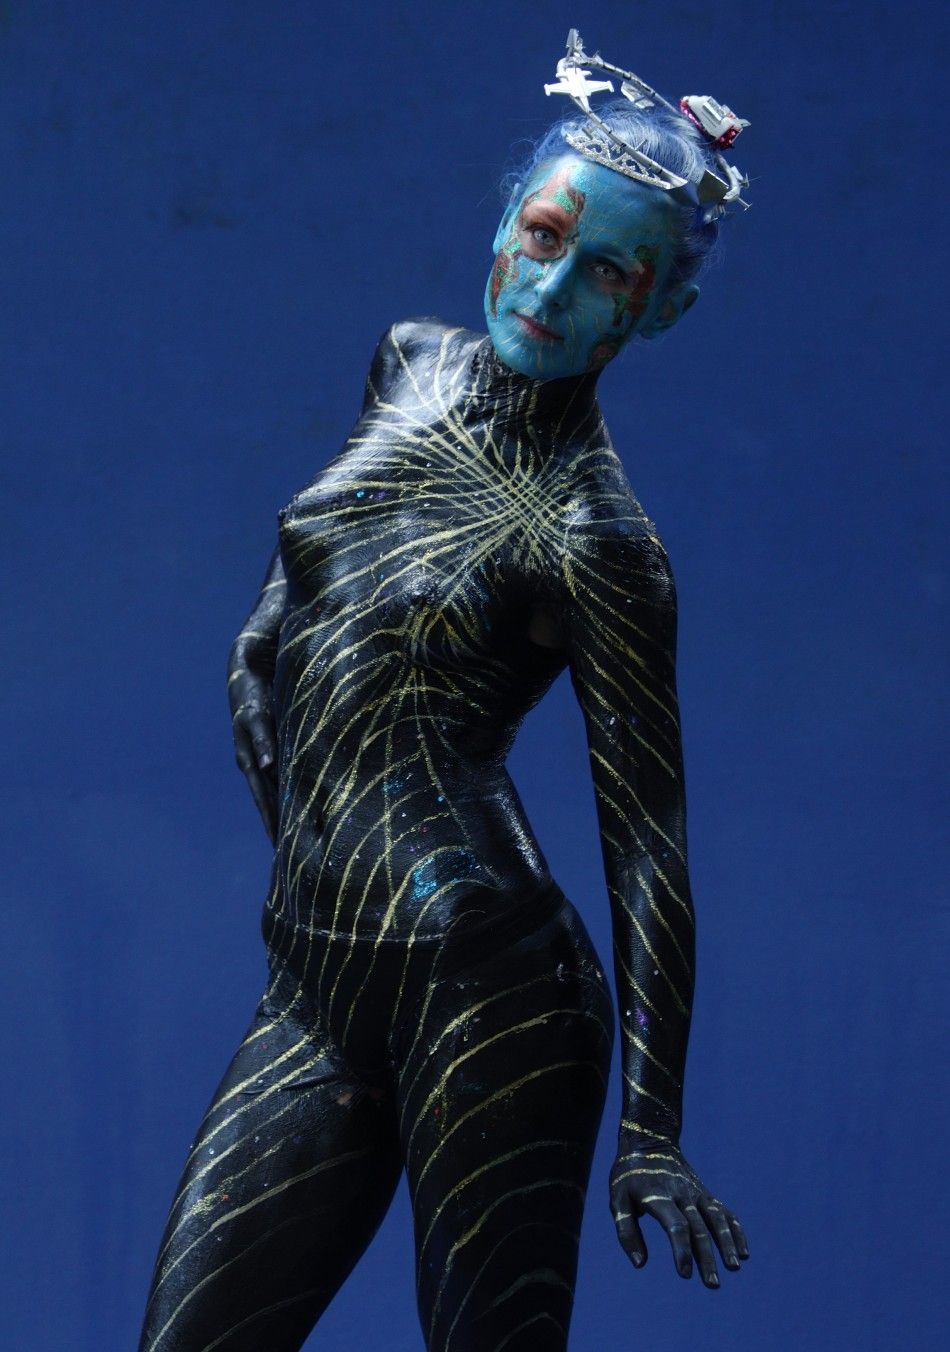 A models poses during the annual World Bodypainting Festival in Poertschach